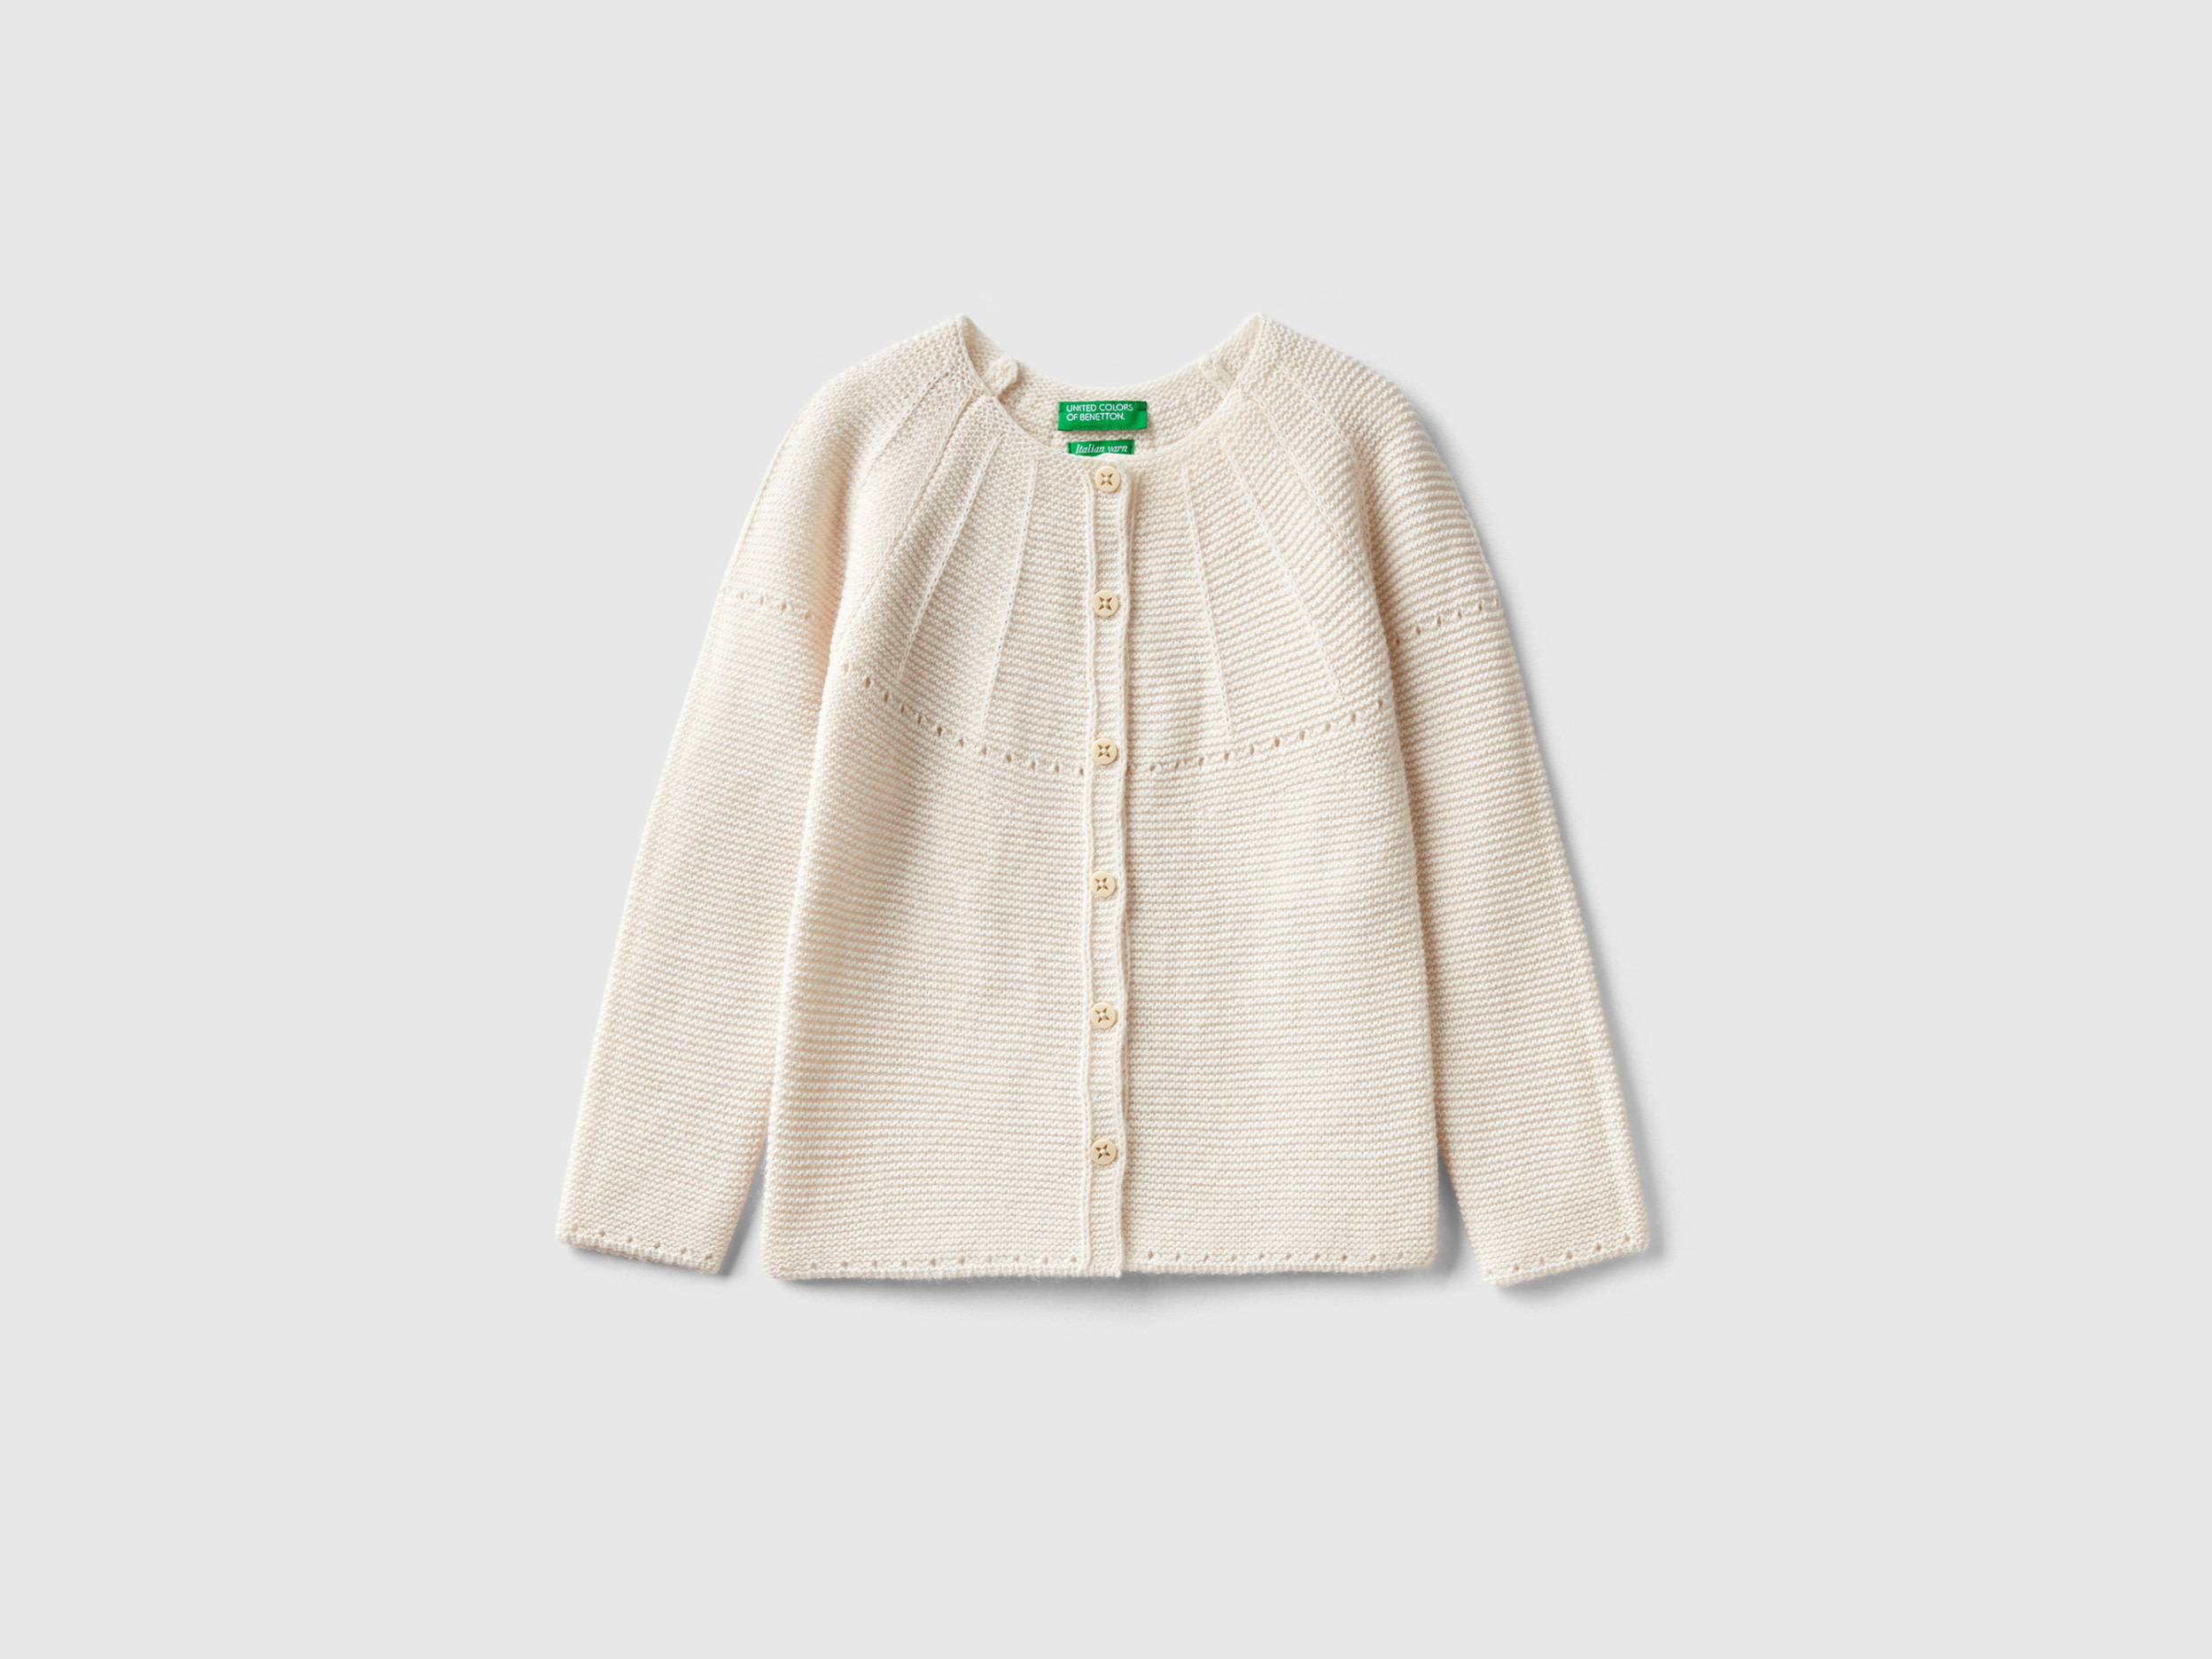 Benetton, Cardigan With Perforated Details, size 3-4, Creamy White, Kids